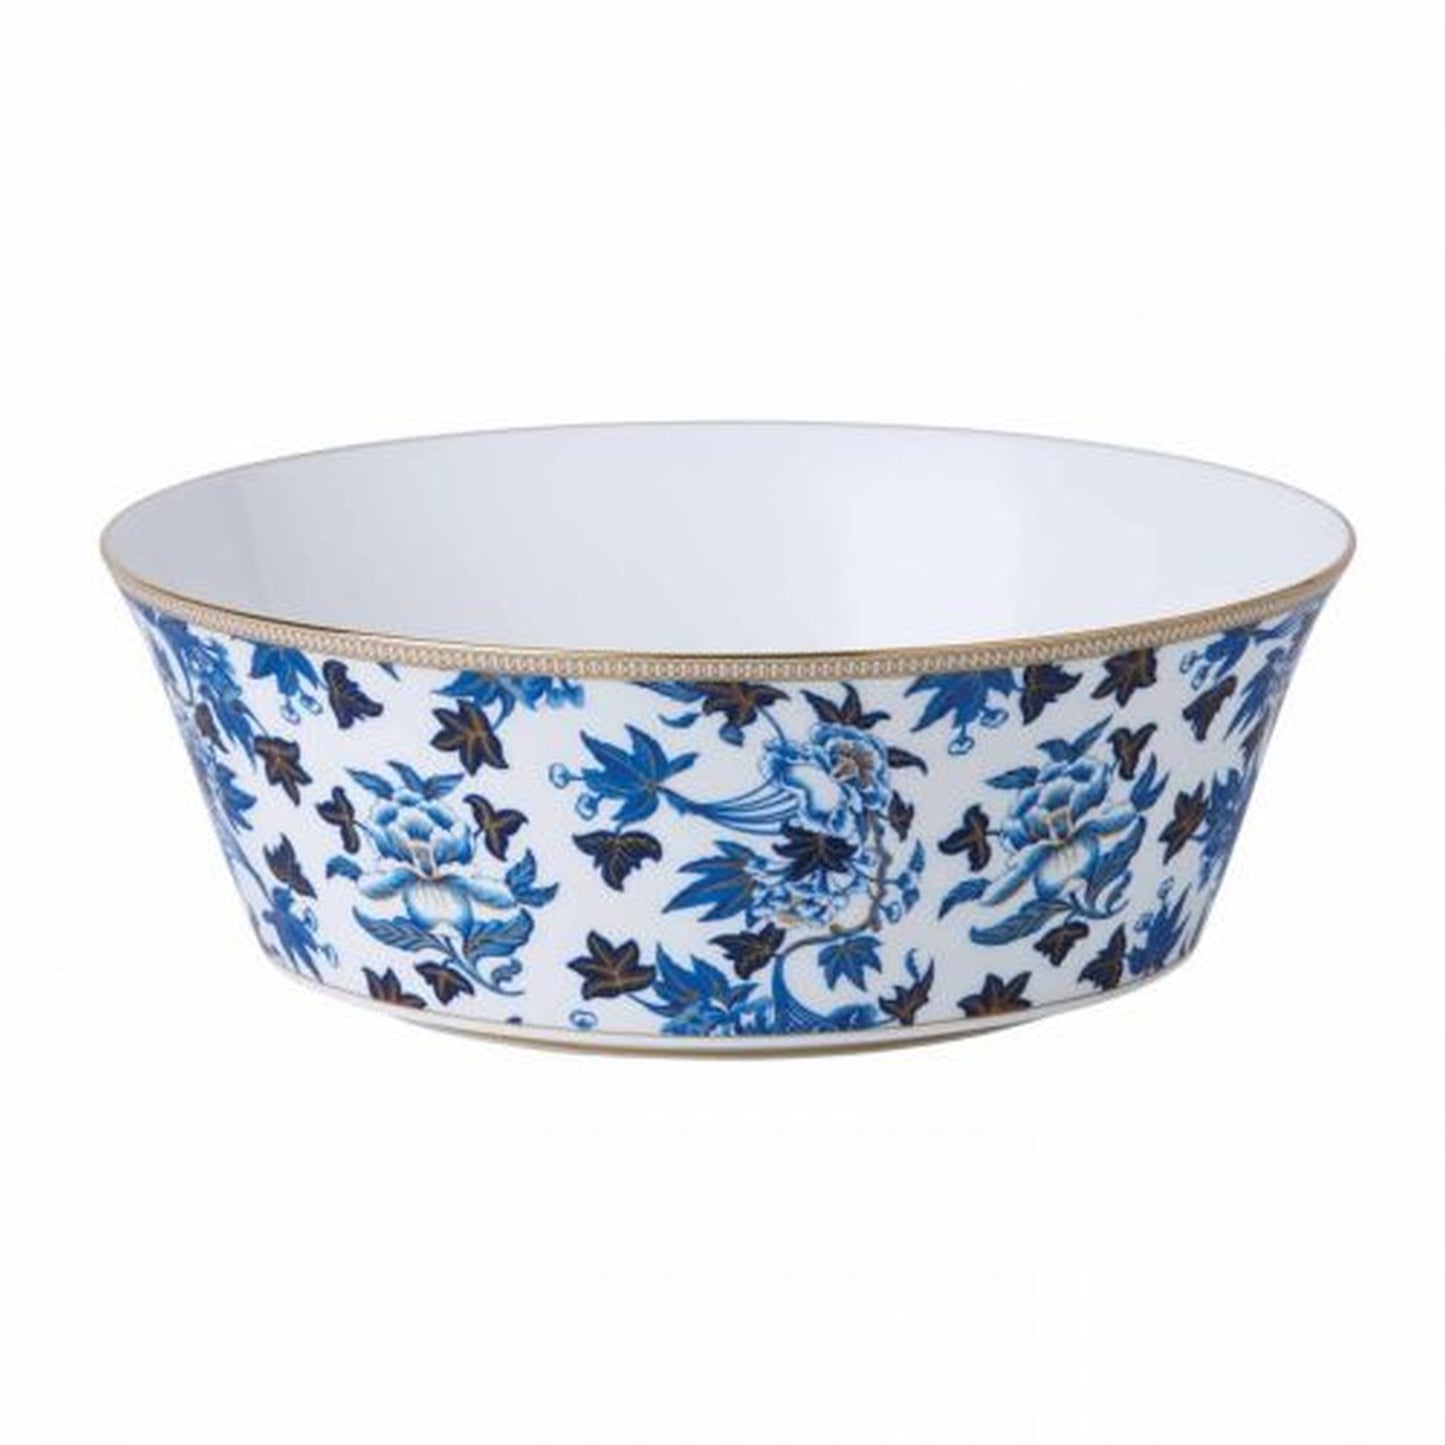 Wedgwood Hibiscus Oval Serving Bowl 13.4 Inch Floral